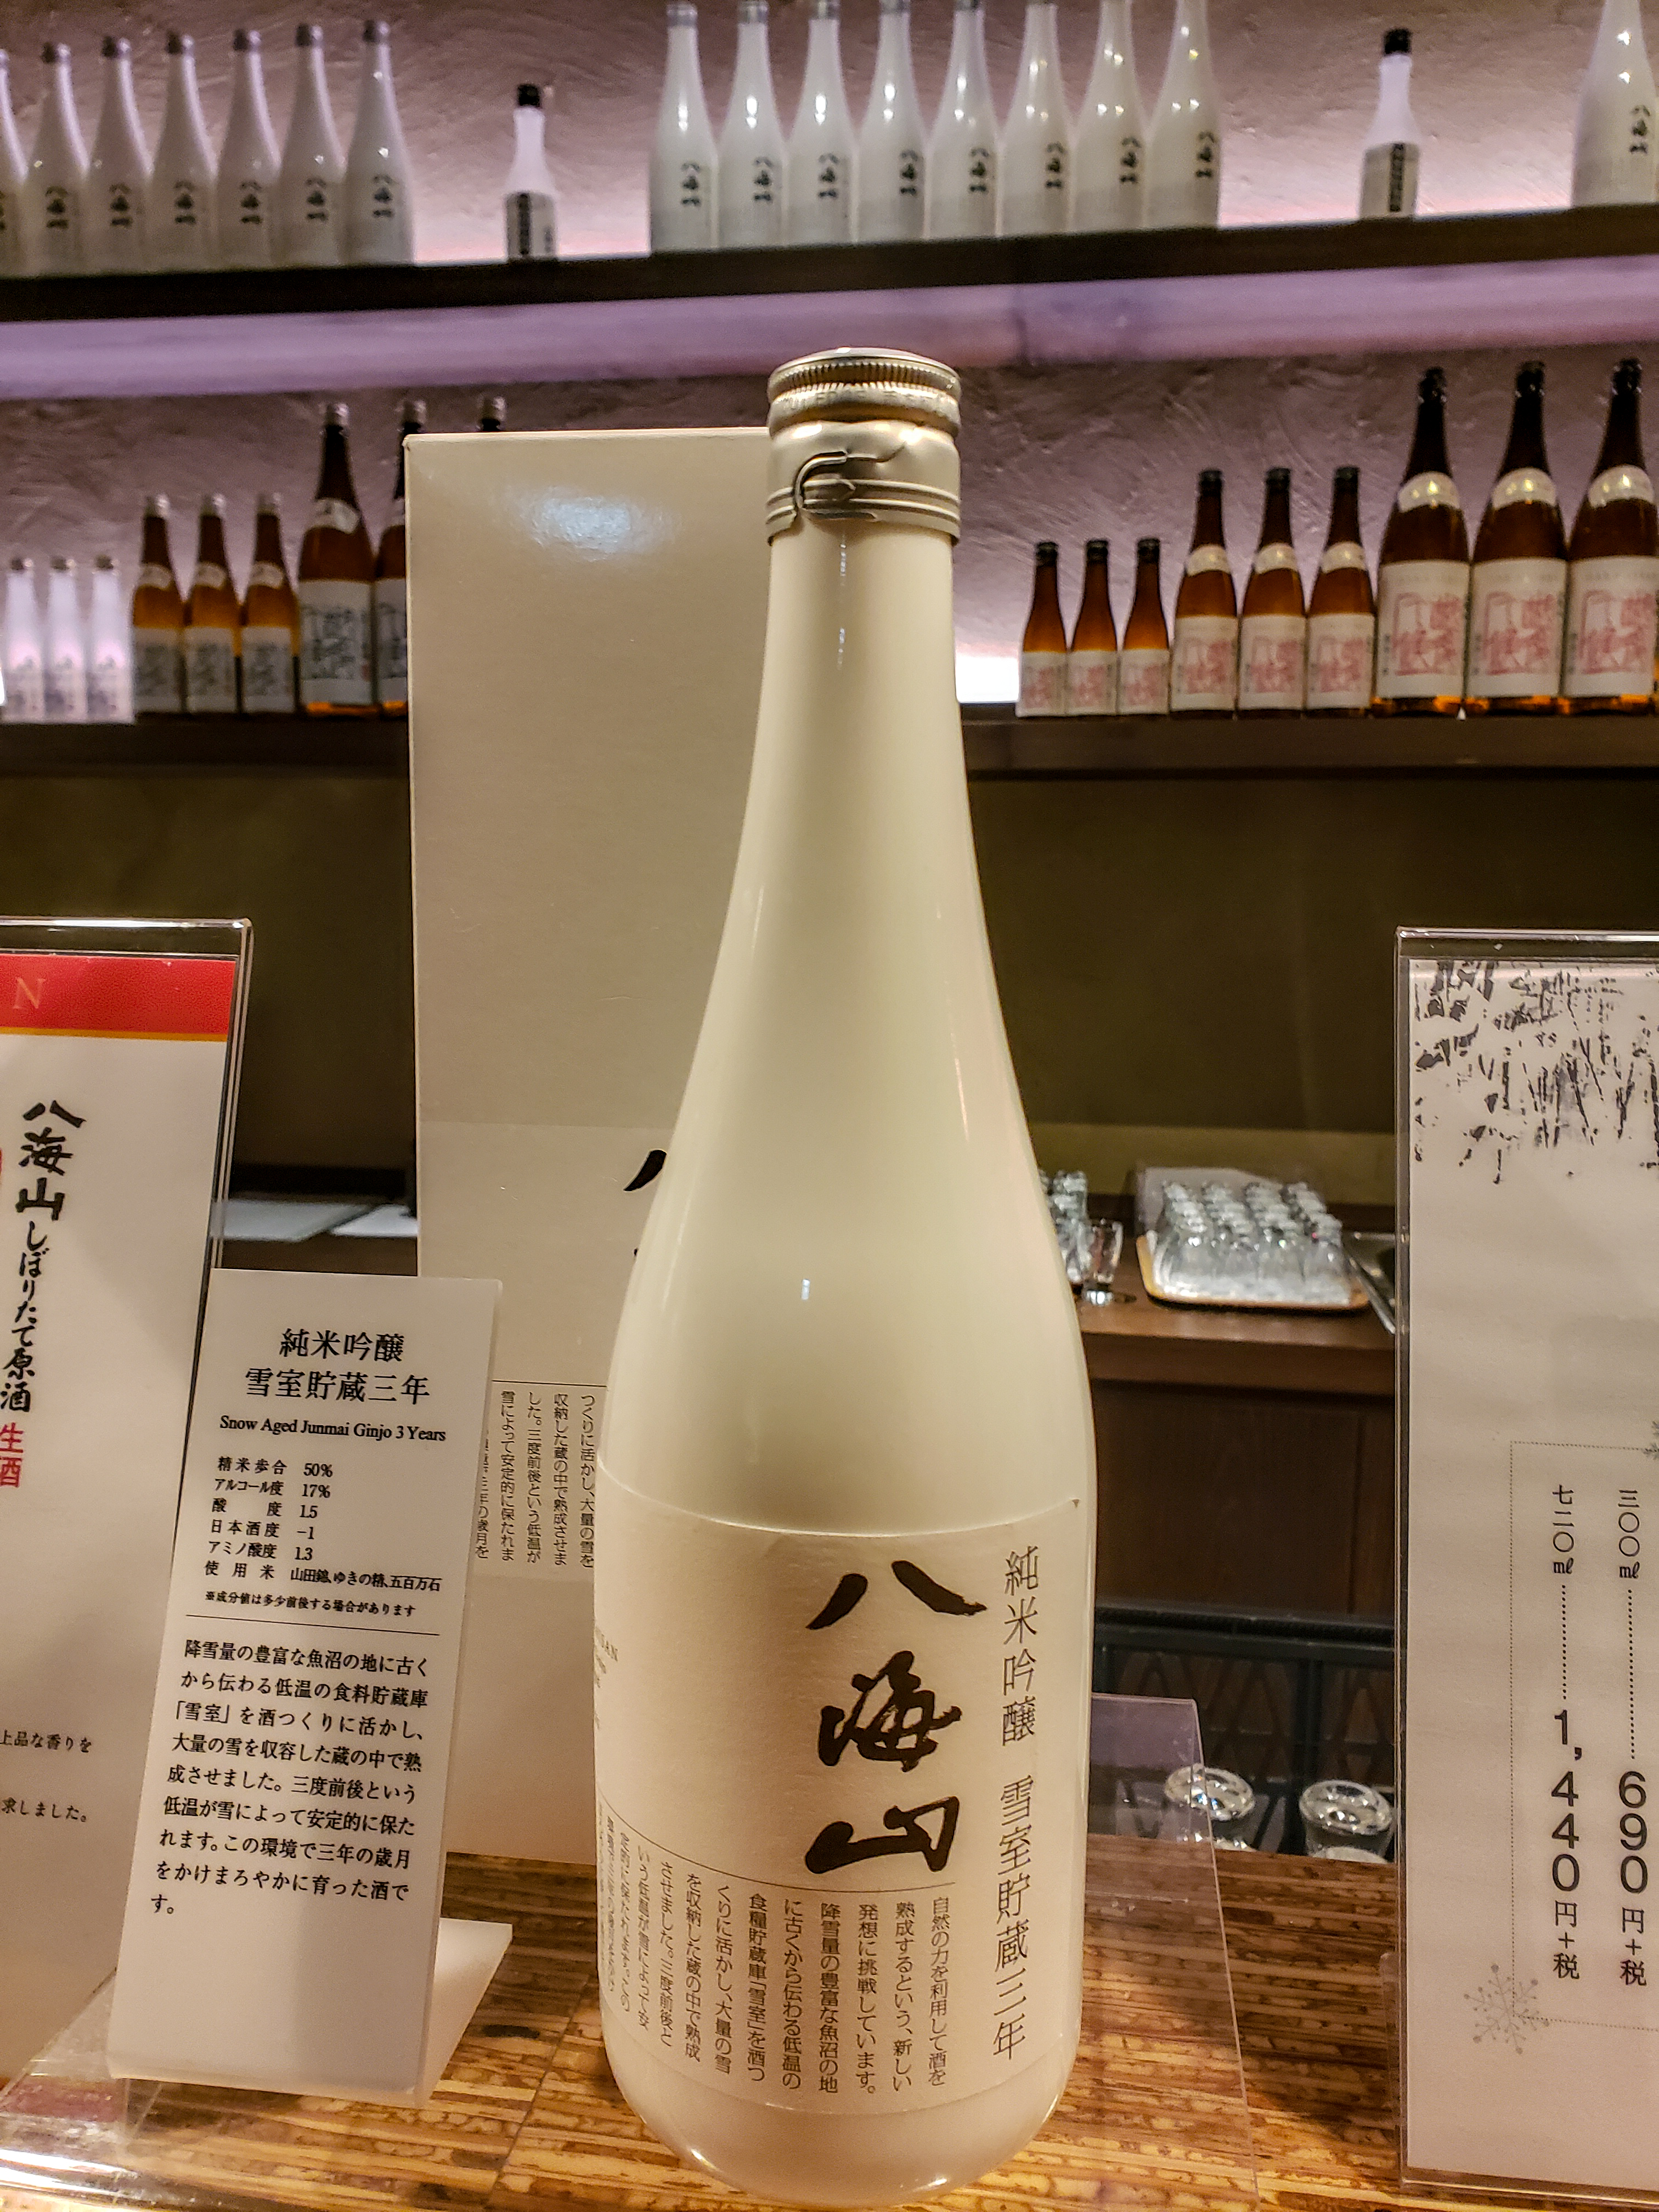 Premium Sake aged for 3 years in the snow.